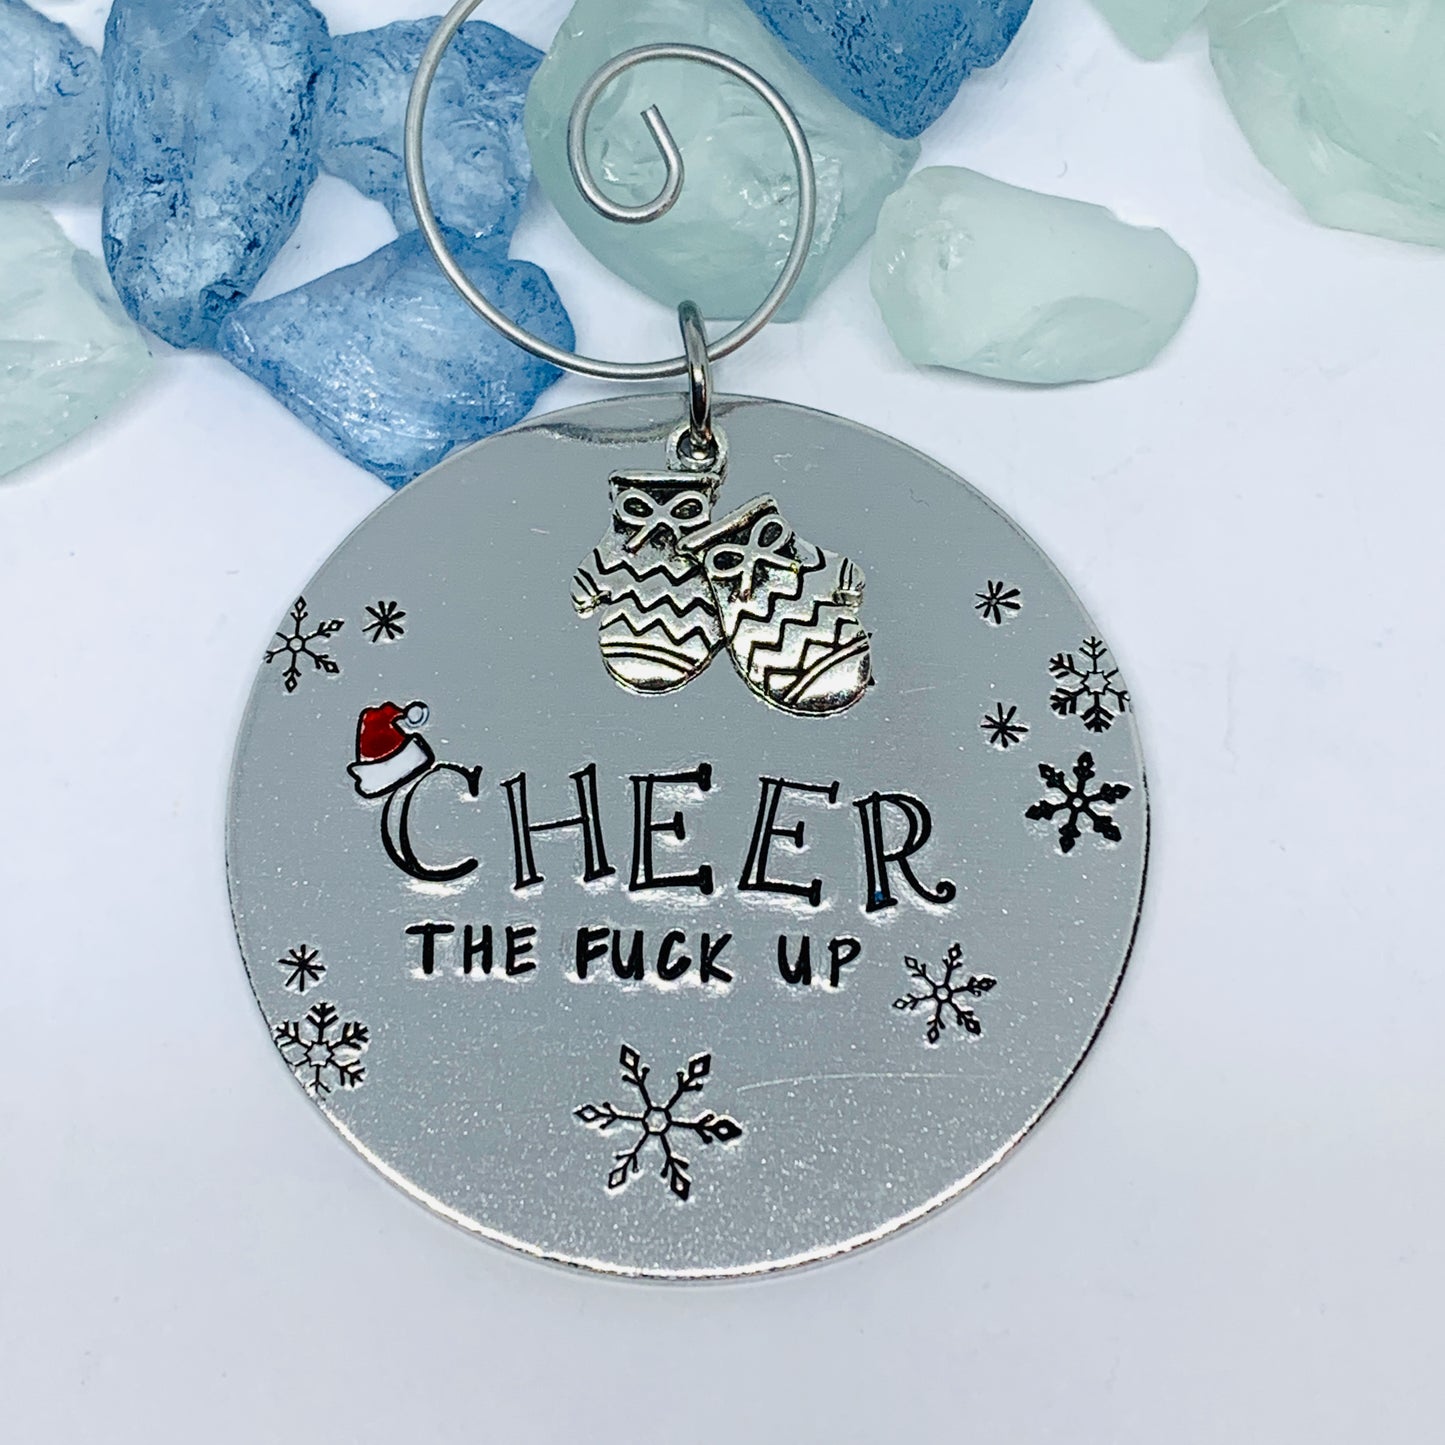 25 Cheer the Fuck Up Ornament | Snowflake Adult Christmas Tree | Mittens Charm | Hand Painted Hand Stamped Housewarming Gift | Santa Hat Design